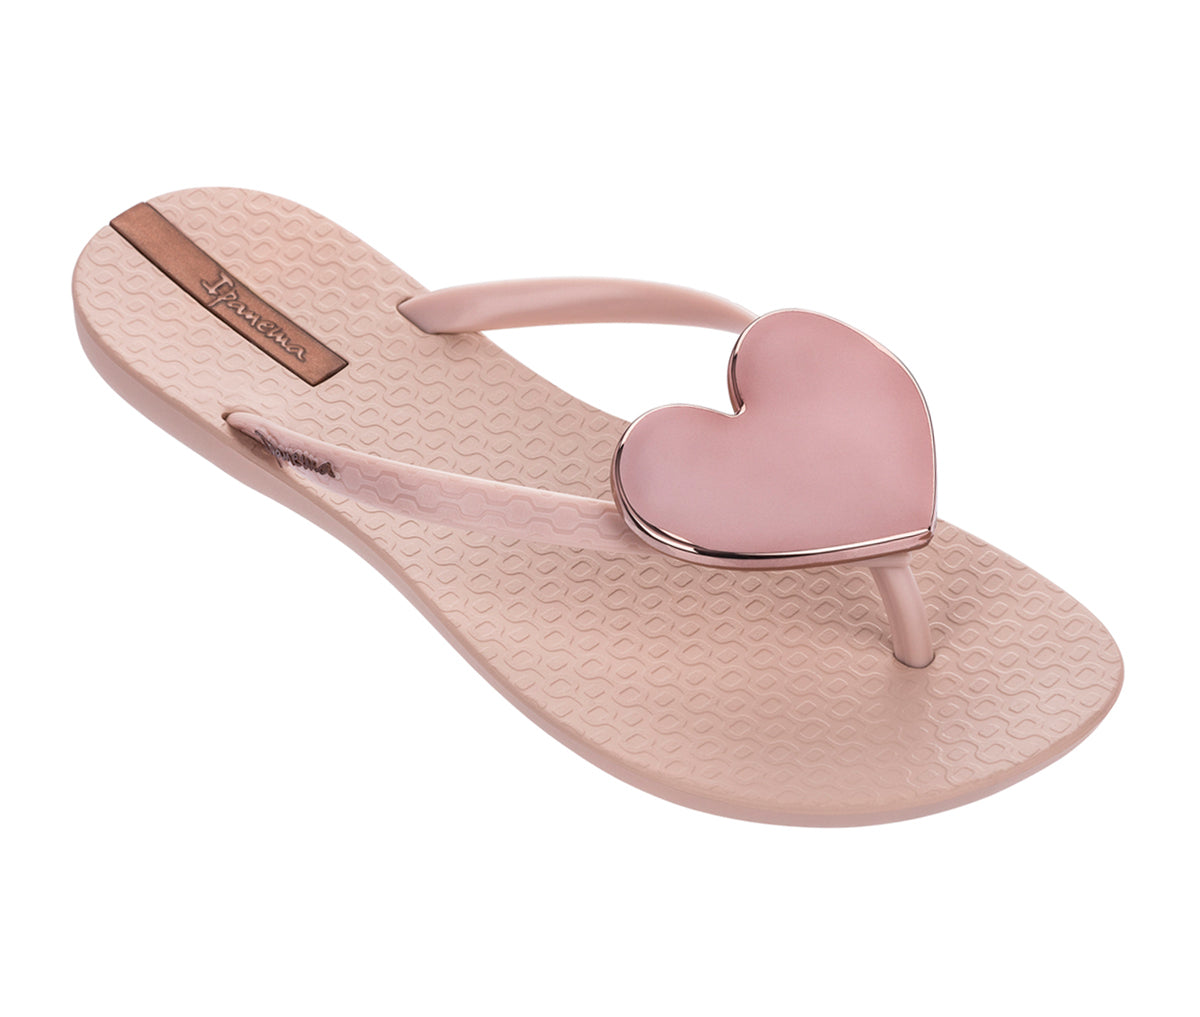 Angled view of a pink Ipanema Wave Heart flip flop with a metallic pink heart of top.